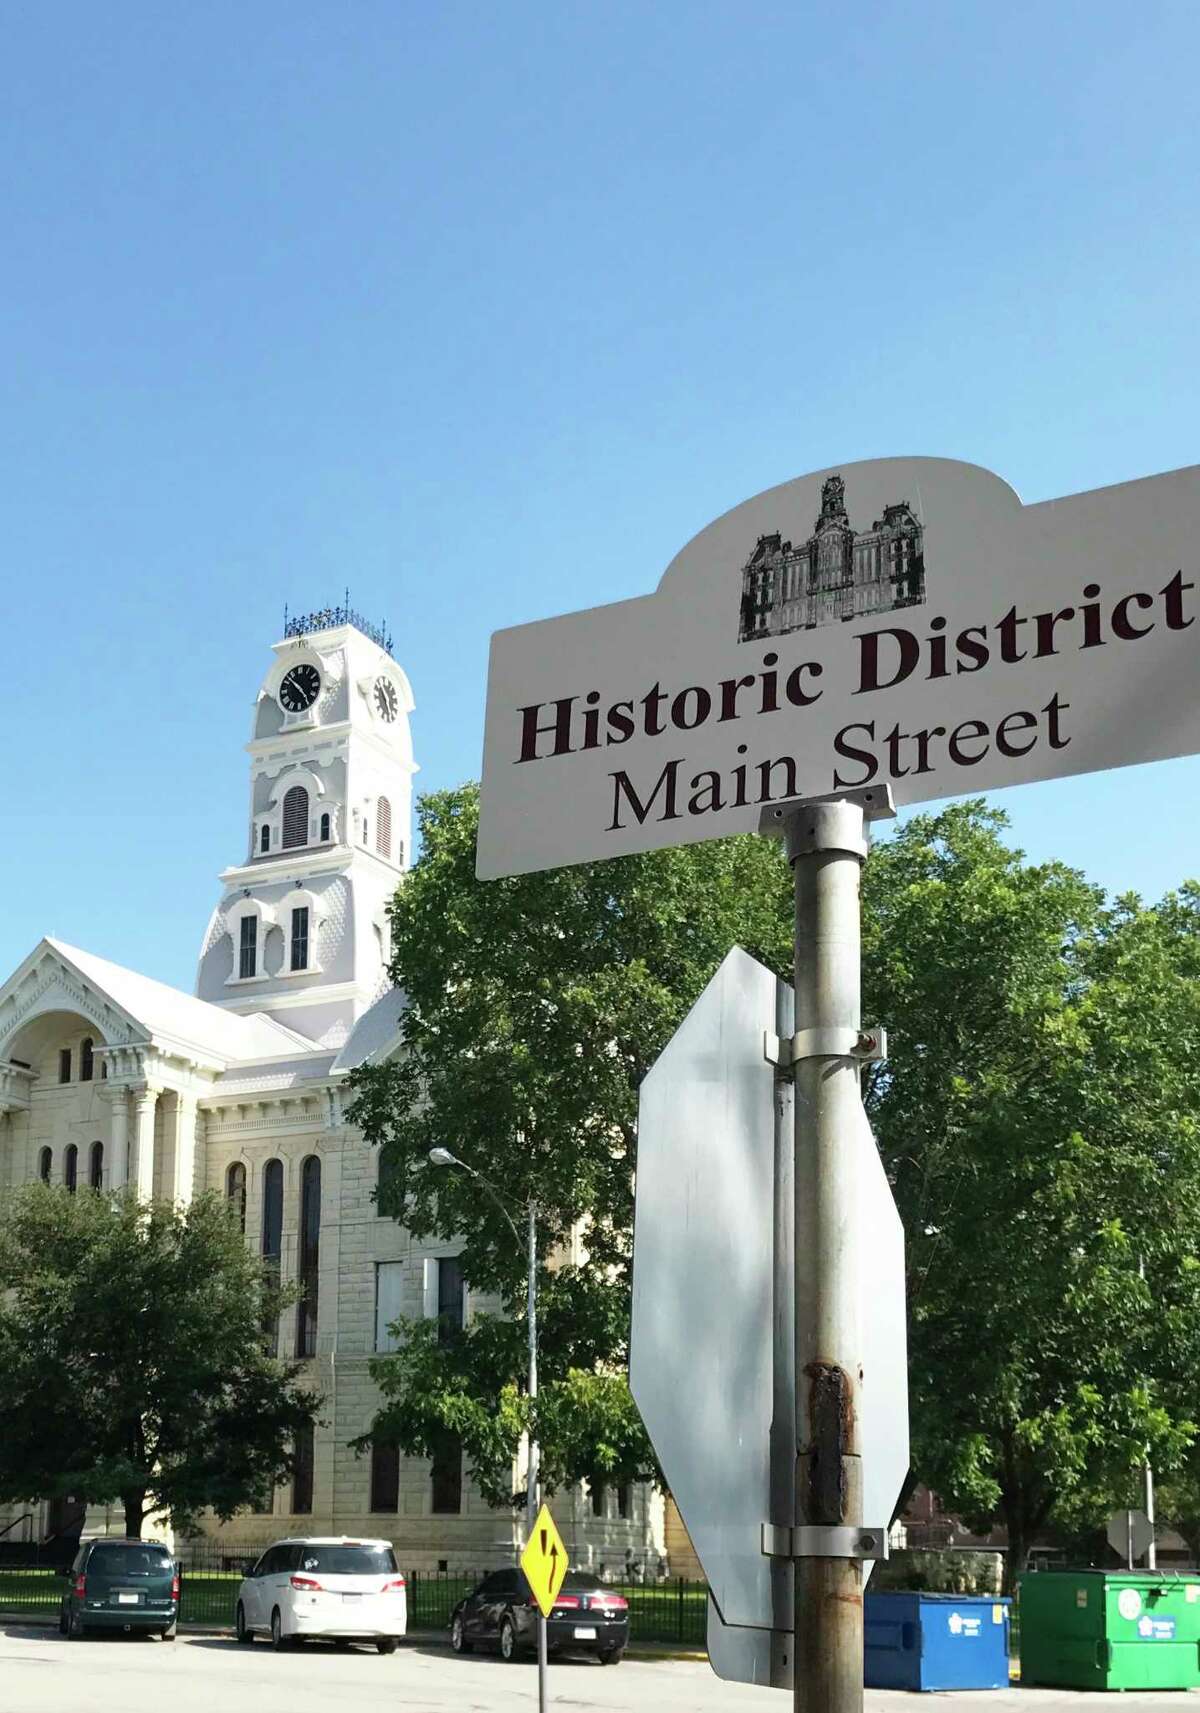 The Central Texas town of Hillsboro has learned to take advantage of its history.